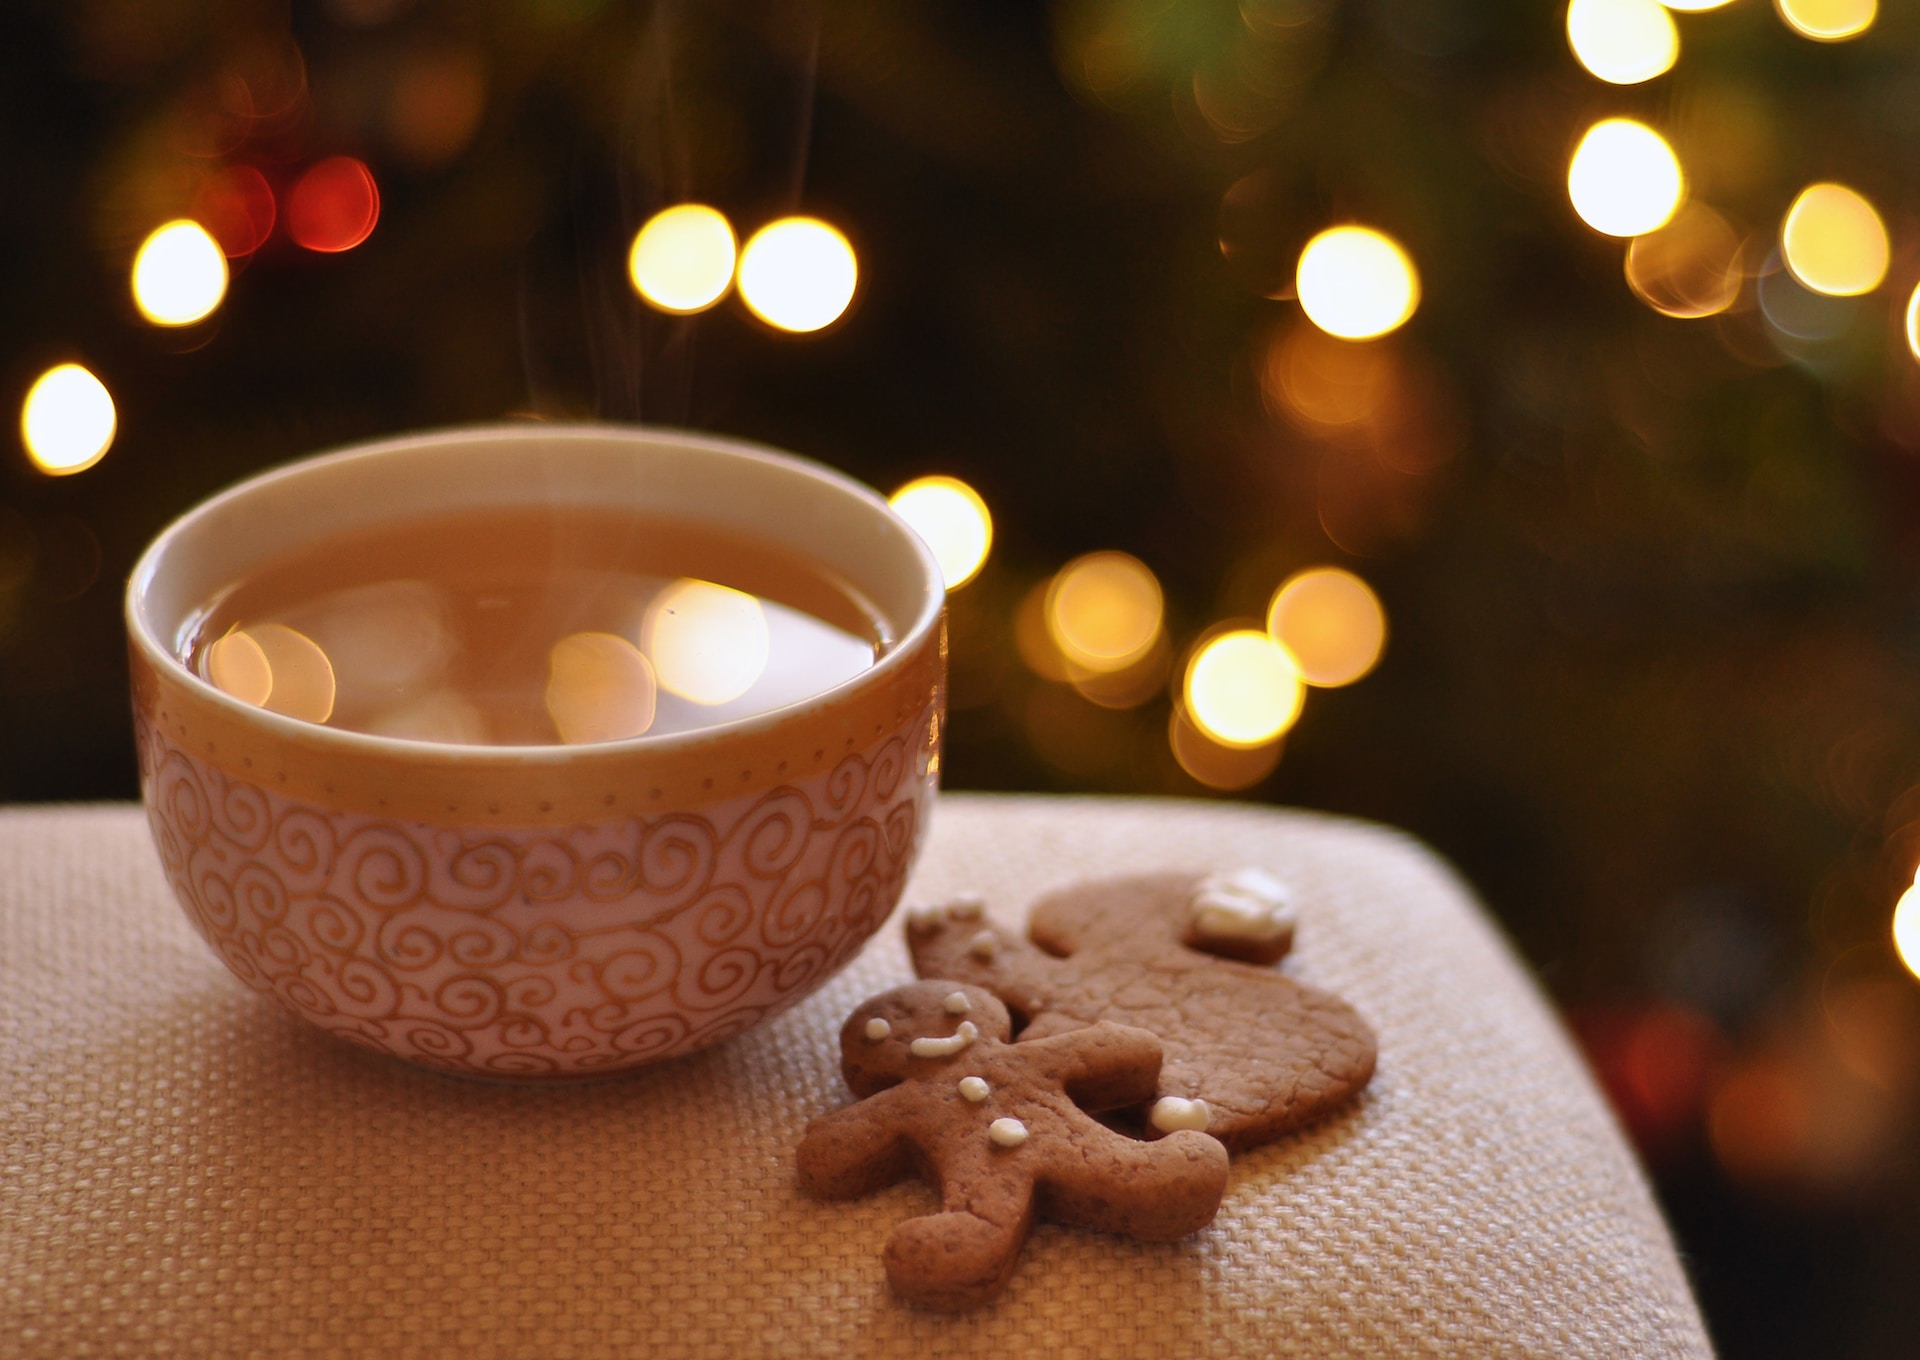 Our Top Five Products for a Mindful Christmas